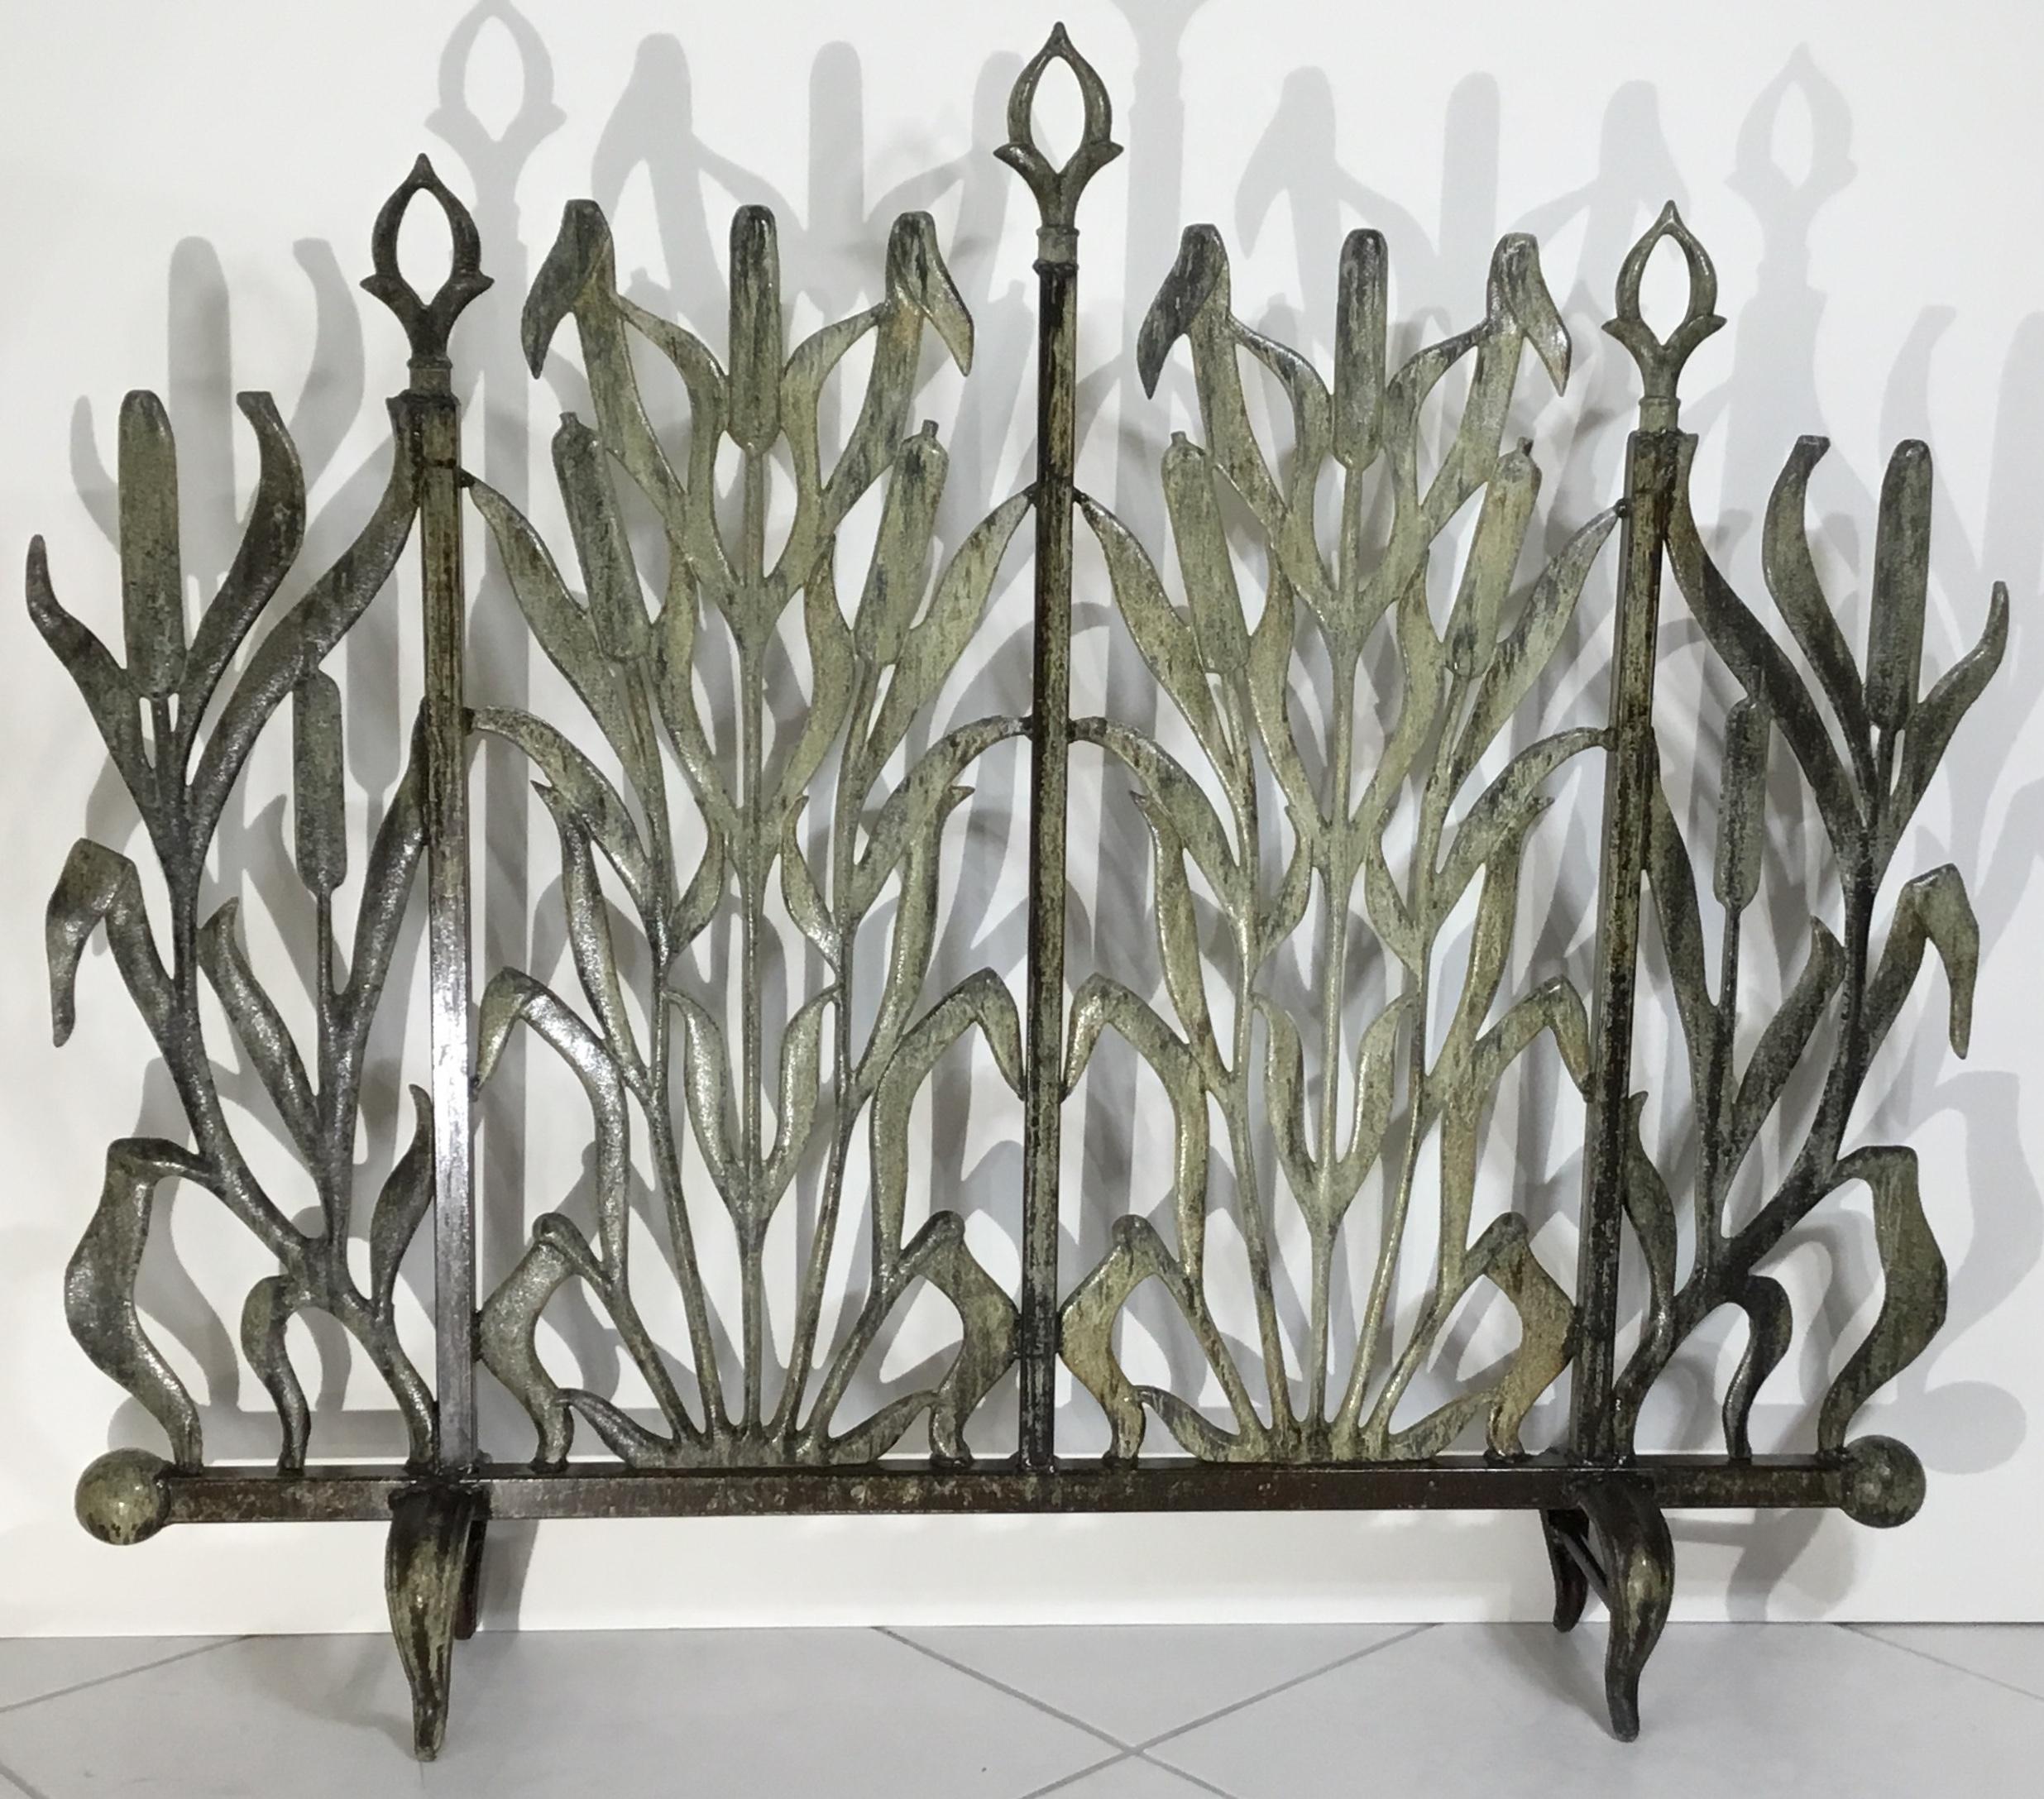 Beautiful fireplace screen made of cast iron, with decorative motifs of cat tail and arrows the fireplace screen is treated and sealed for rust.
Great object of art for display.